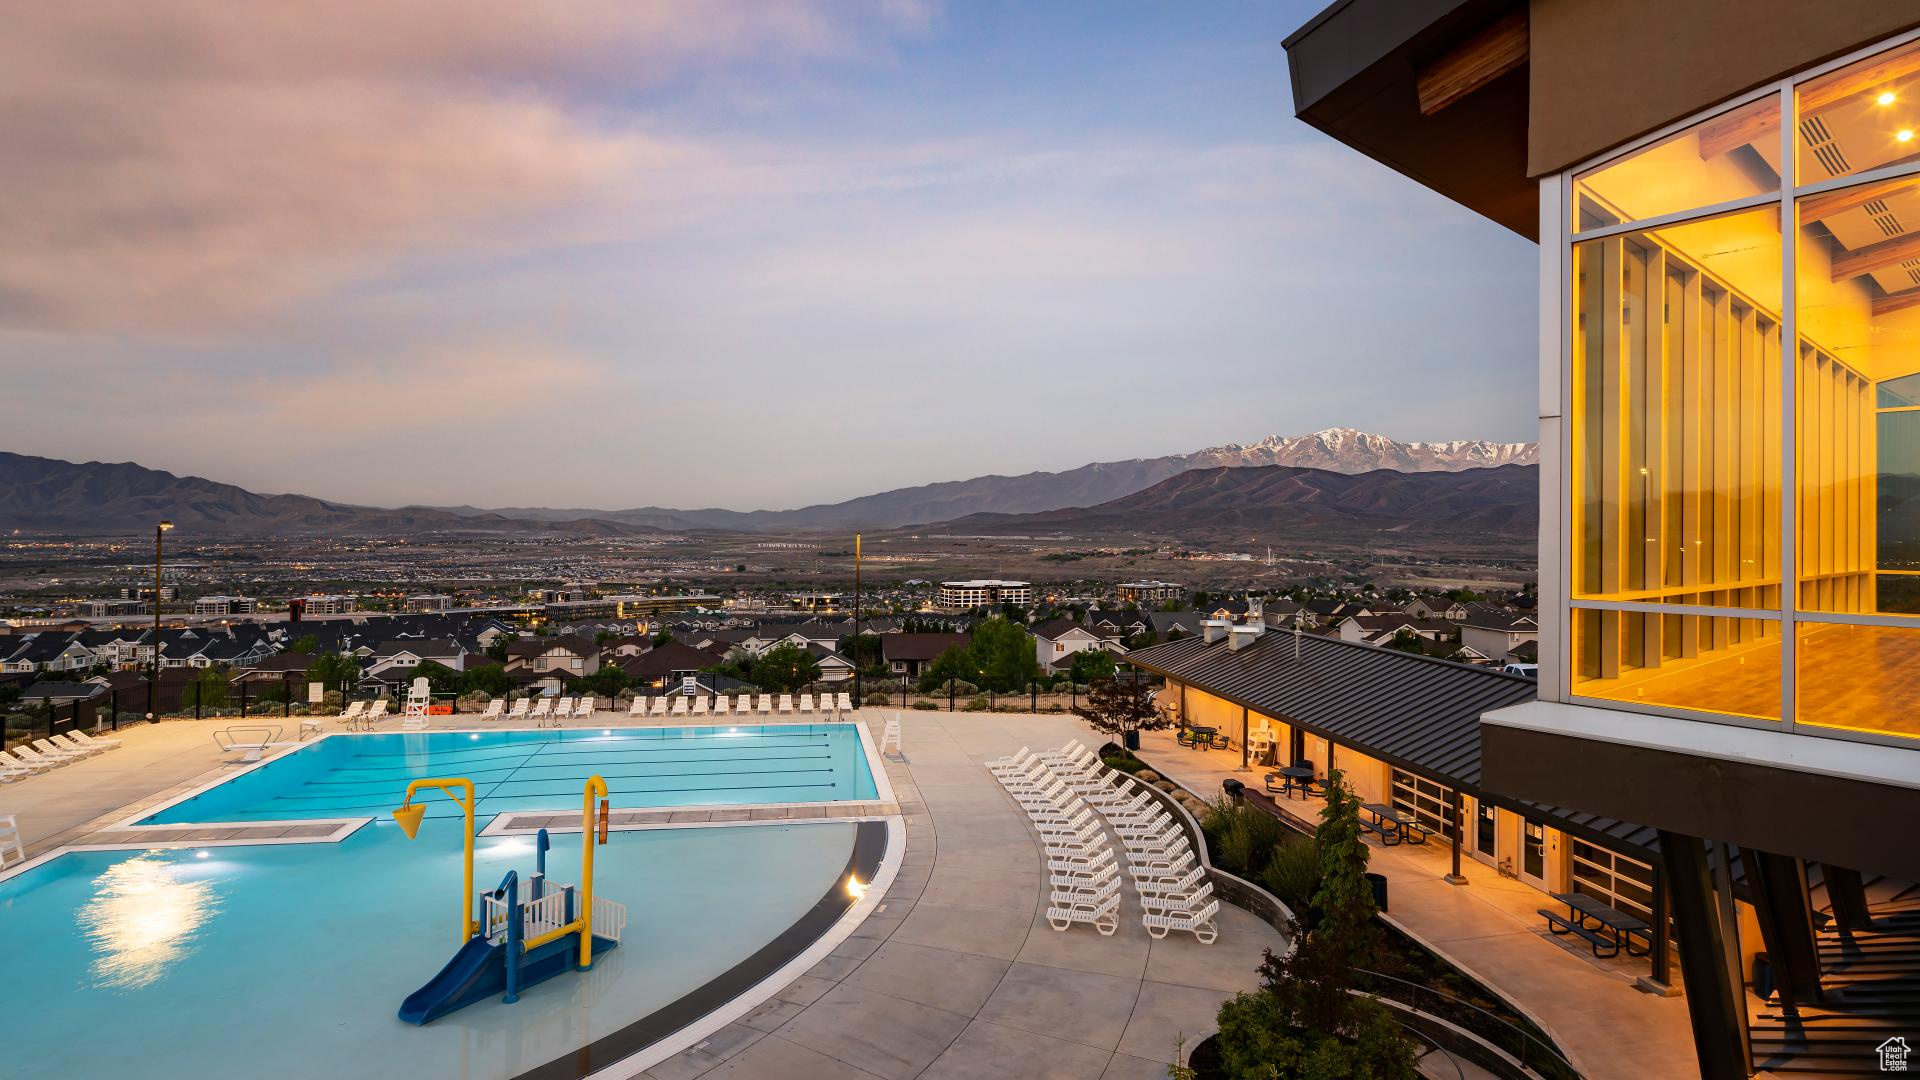 Pool at dusk with a mountain view and a patio